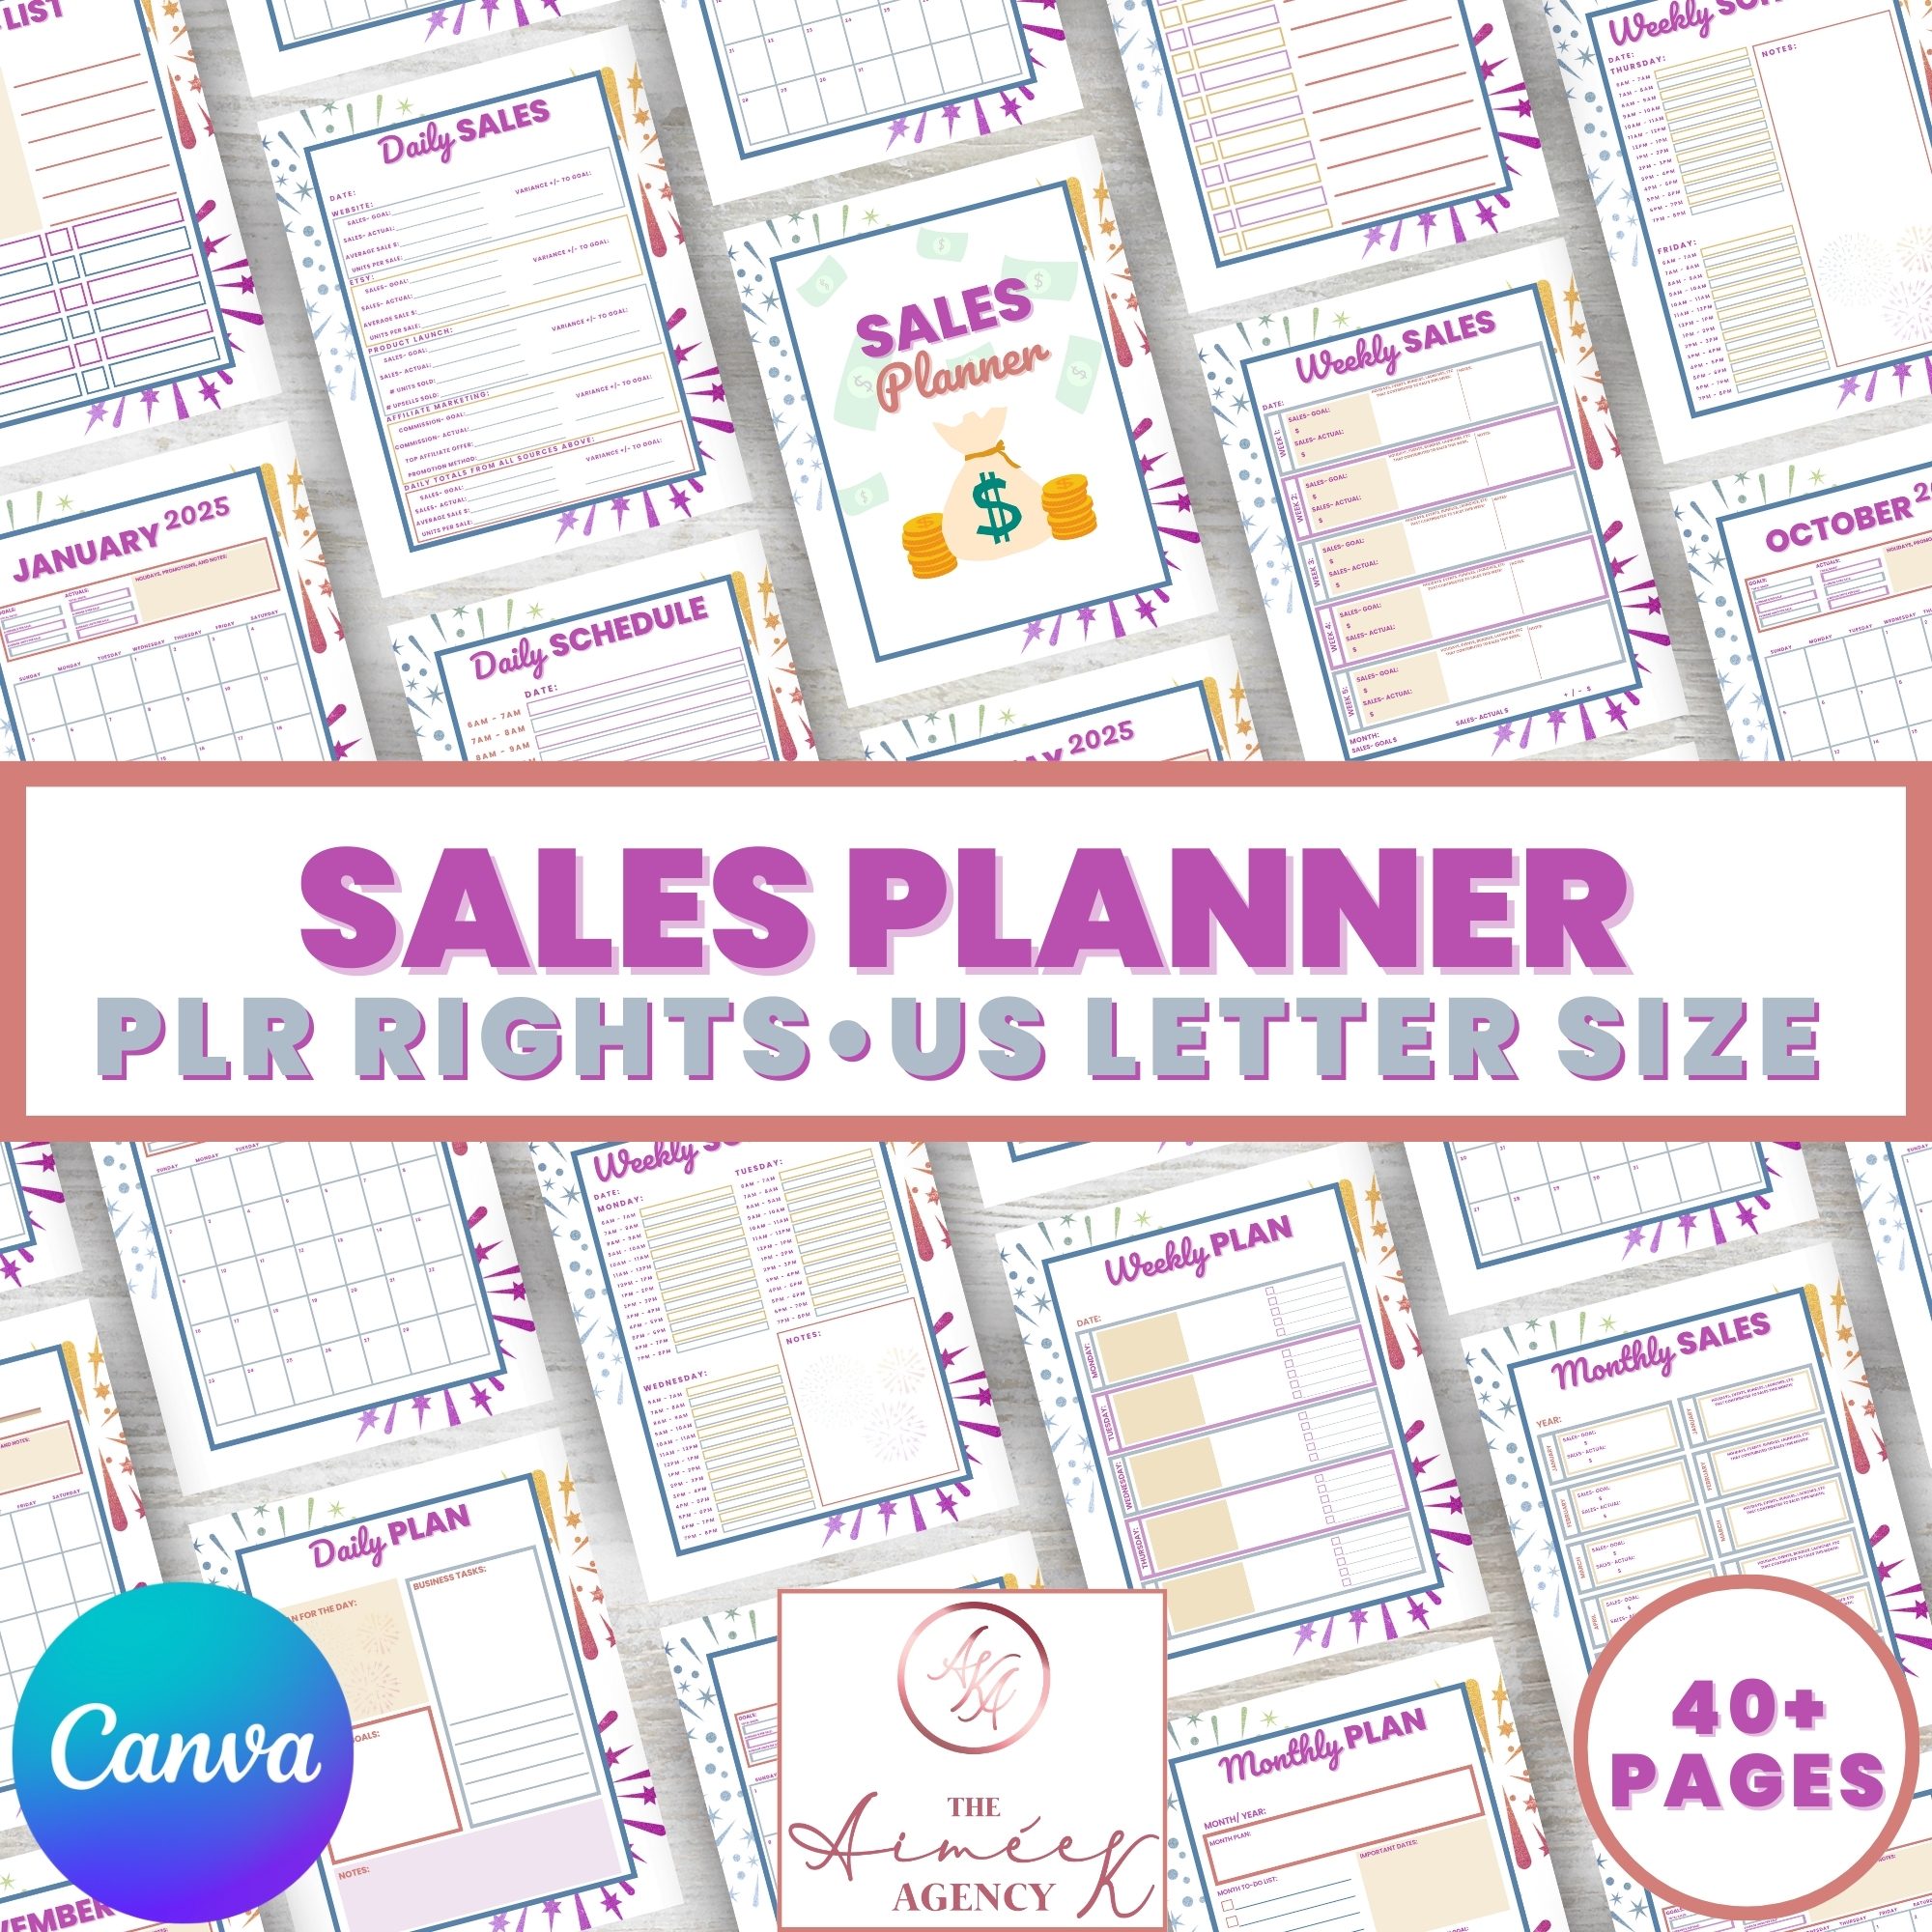 Sales Planner with PLR Rights